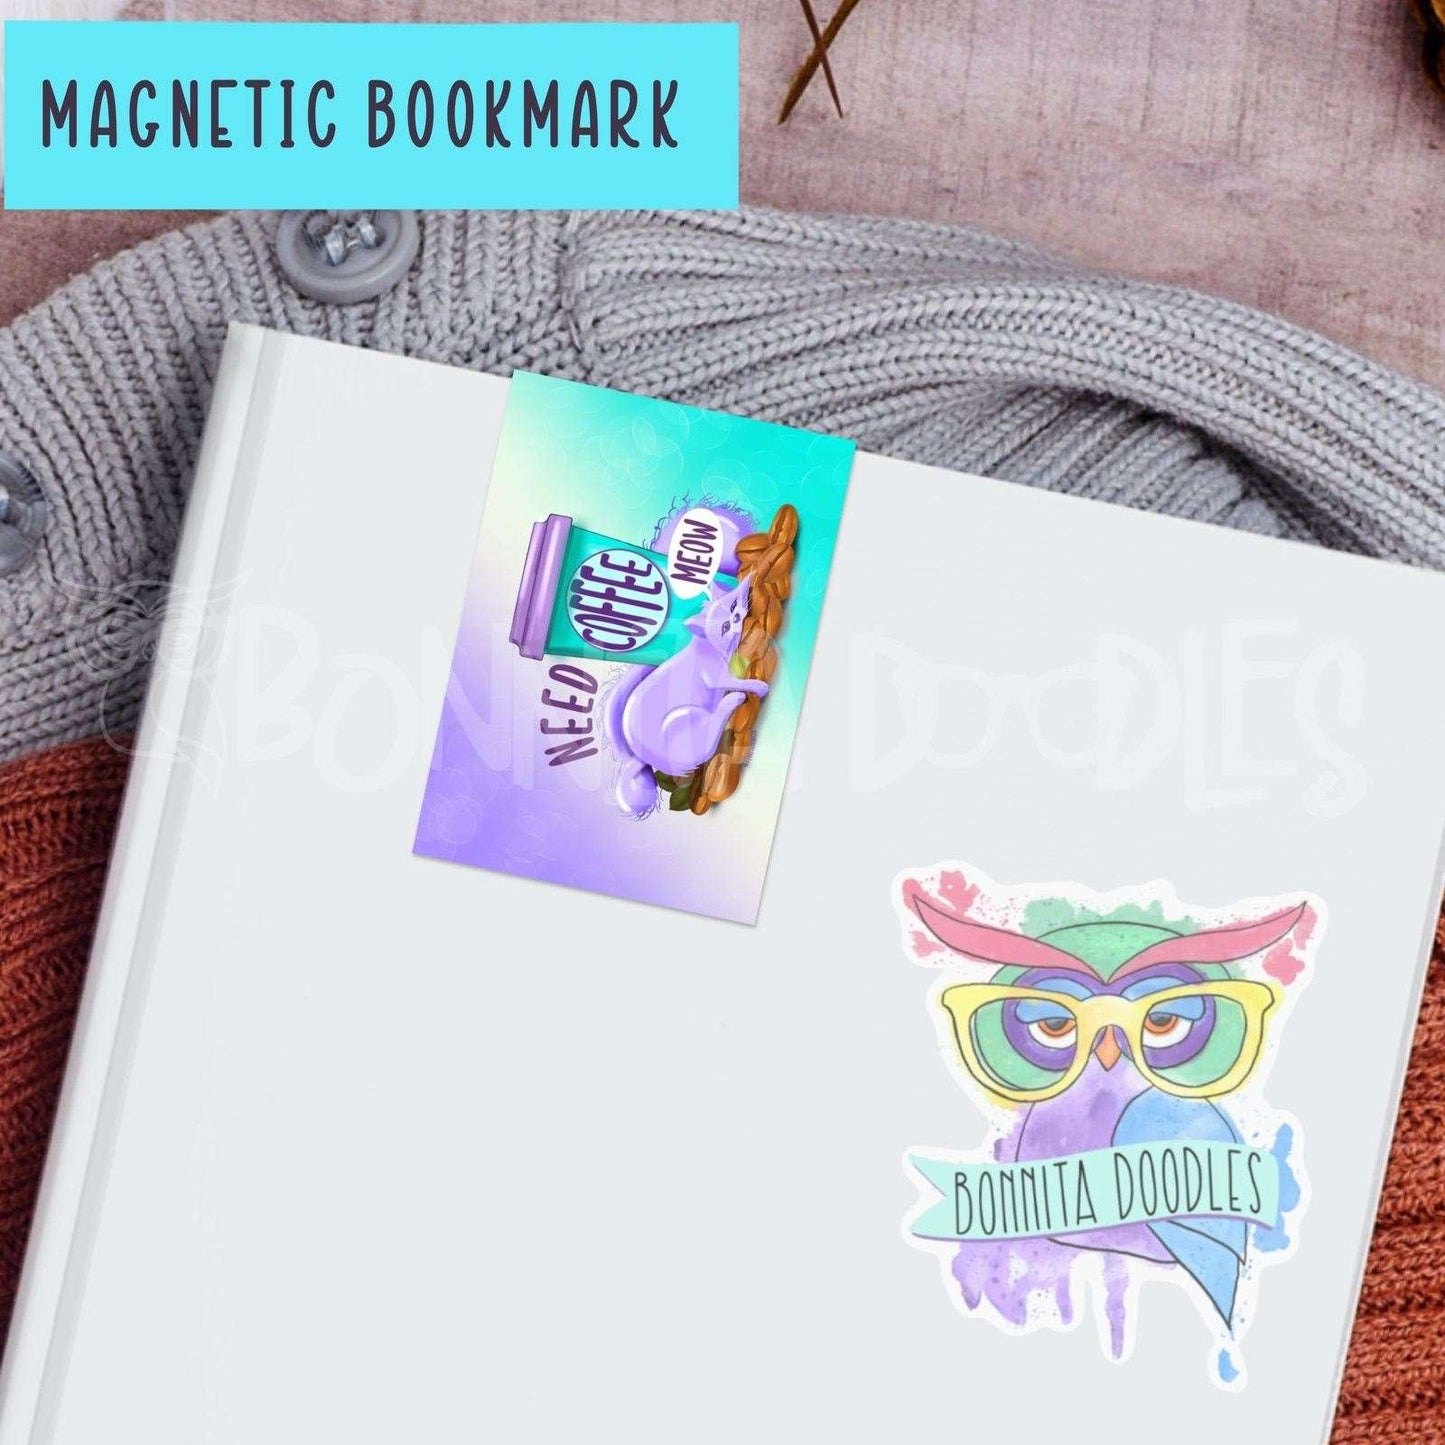 Need coffee meow! Coffee lovers magnetic bookmark - the perfect gift